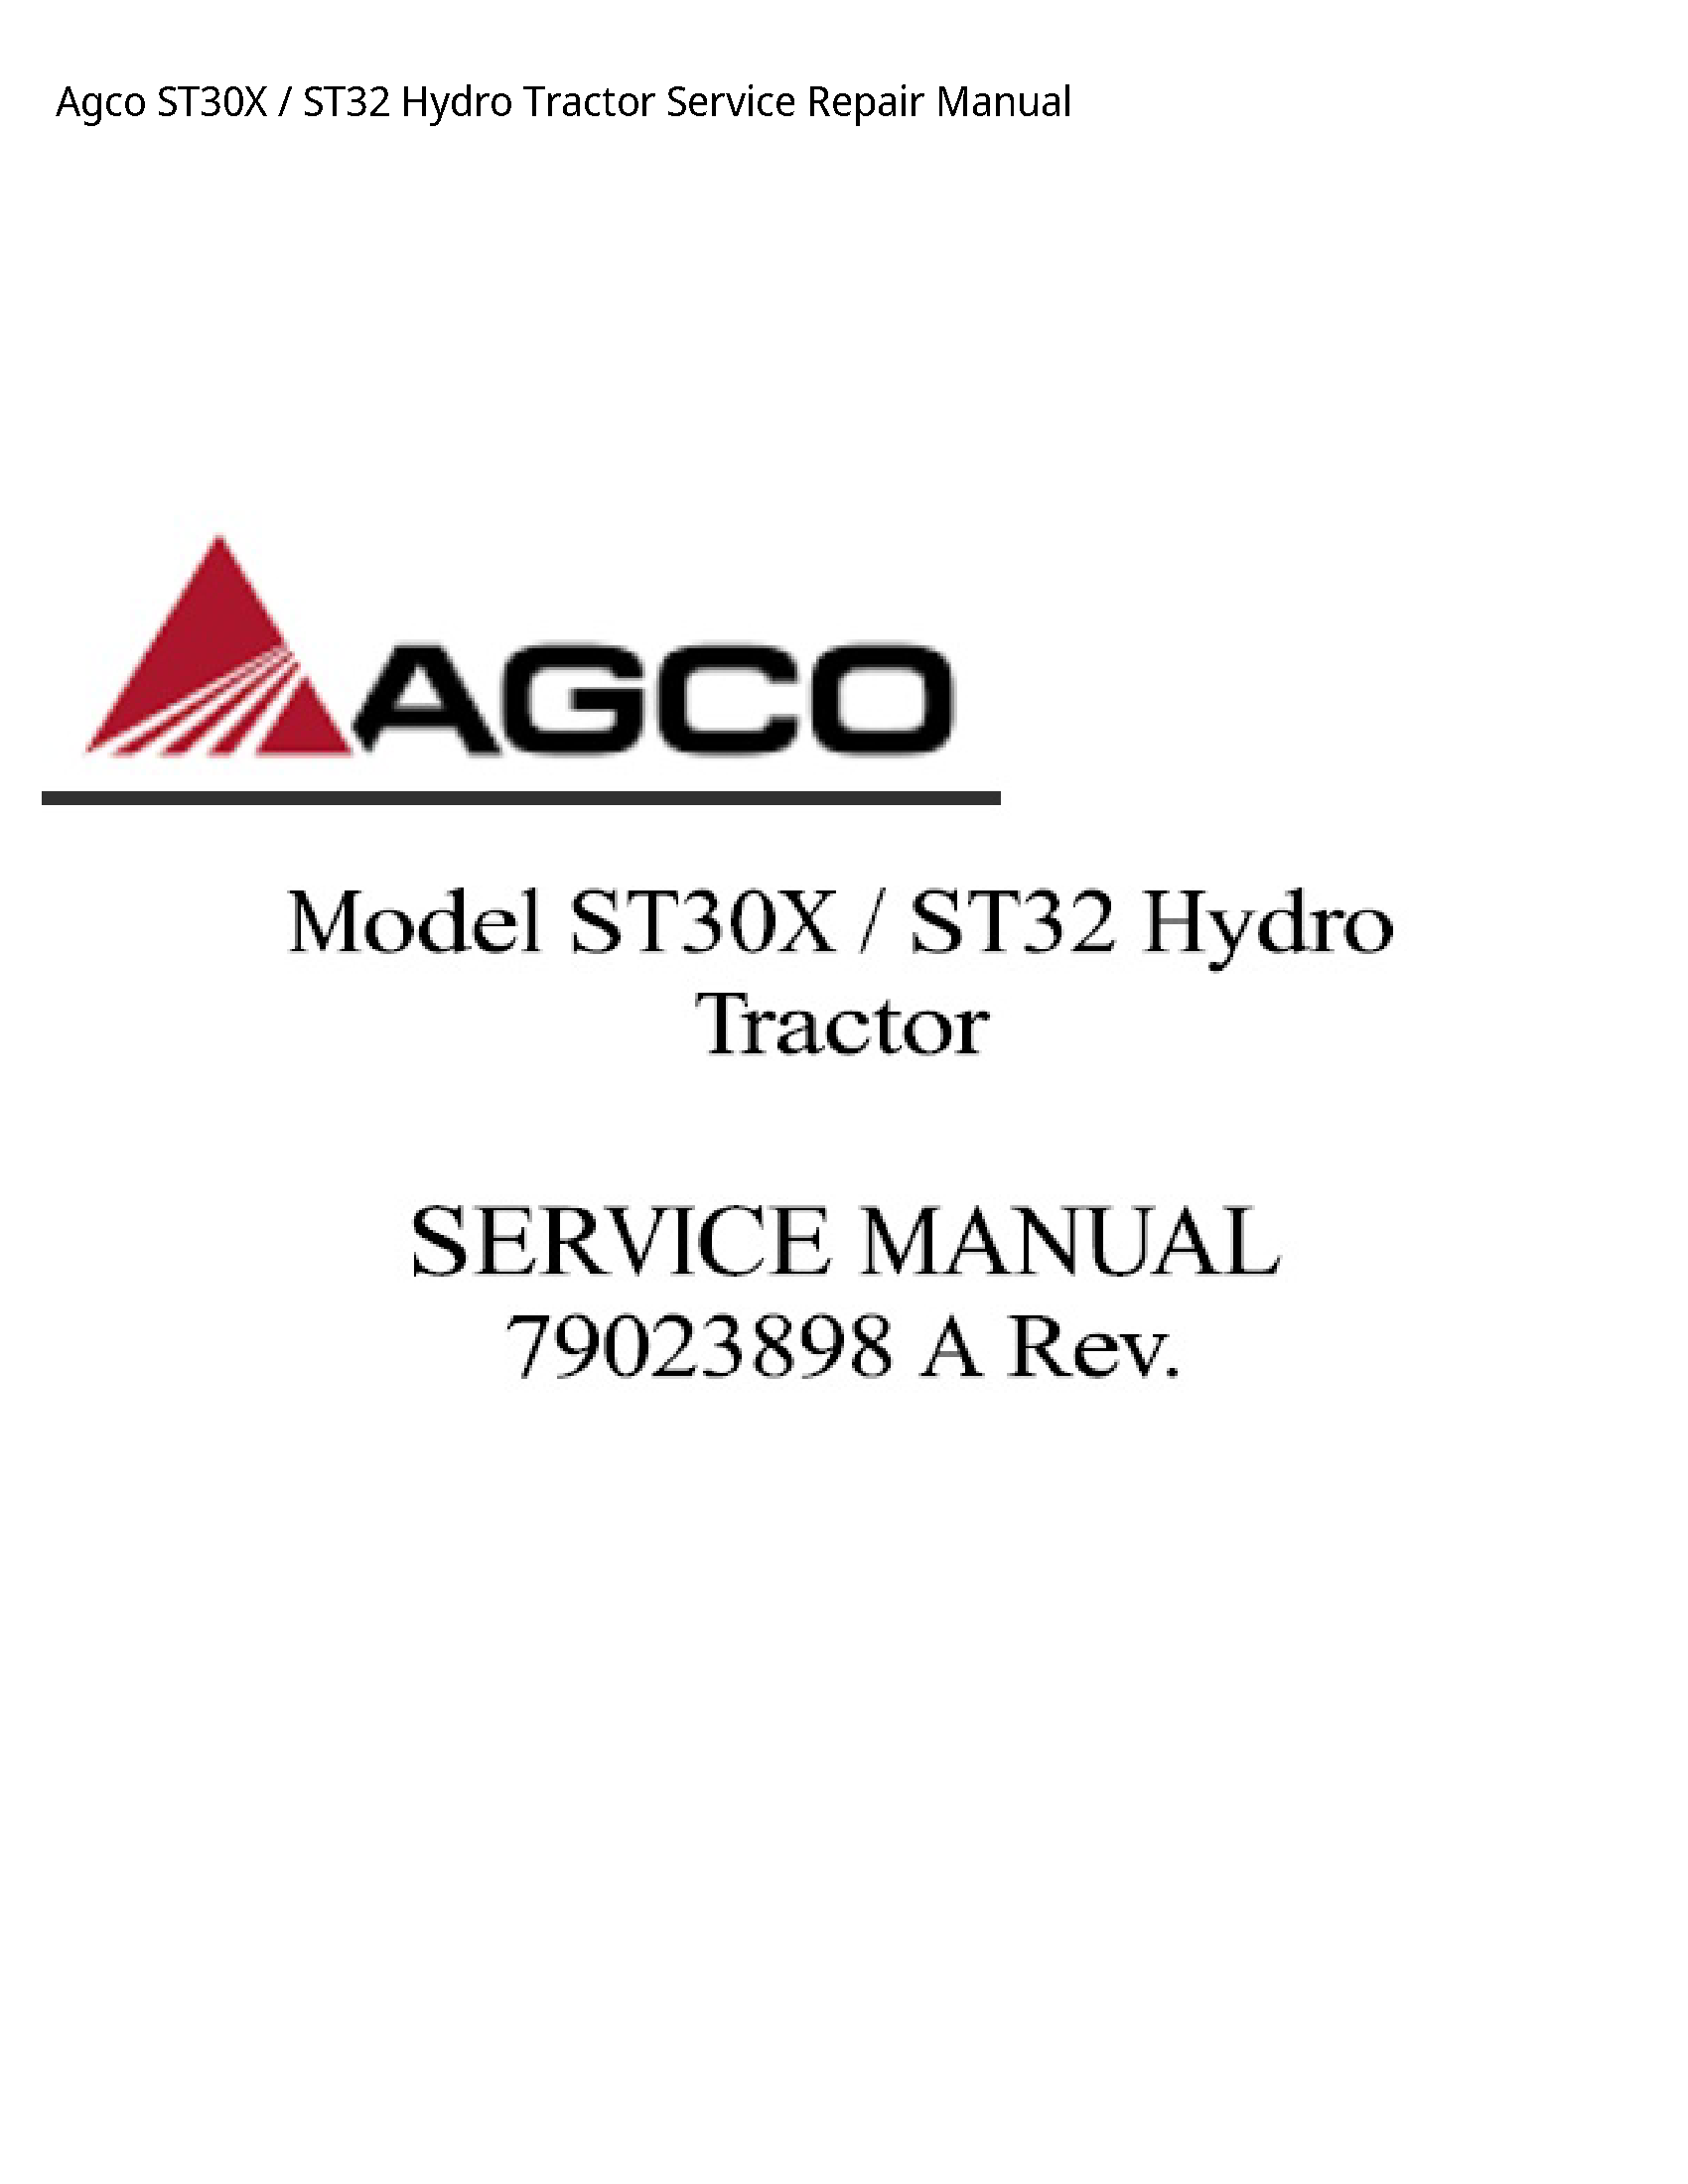 AGCO ST30X Hydro Tractor manual